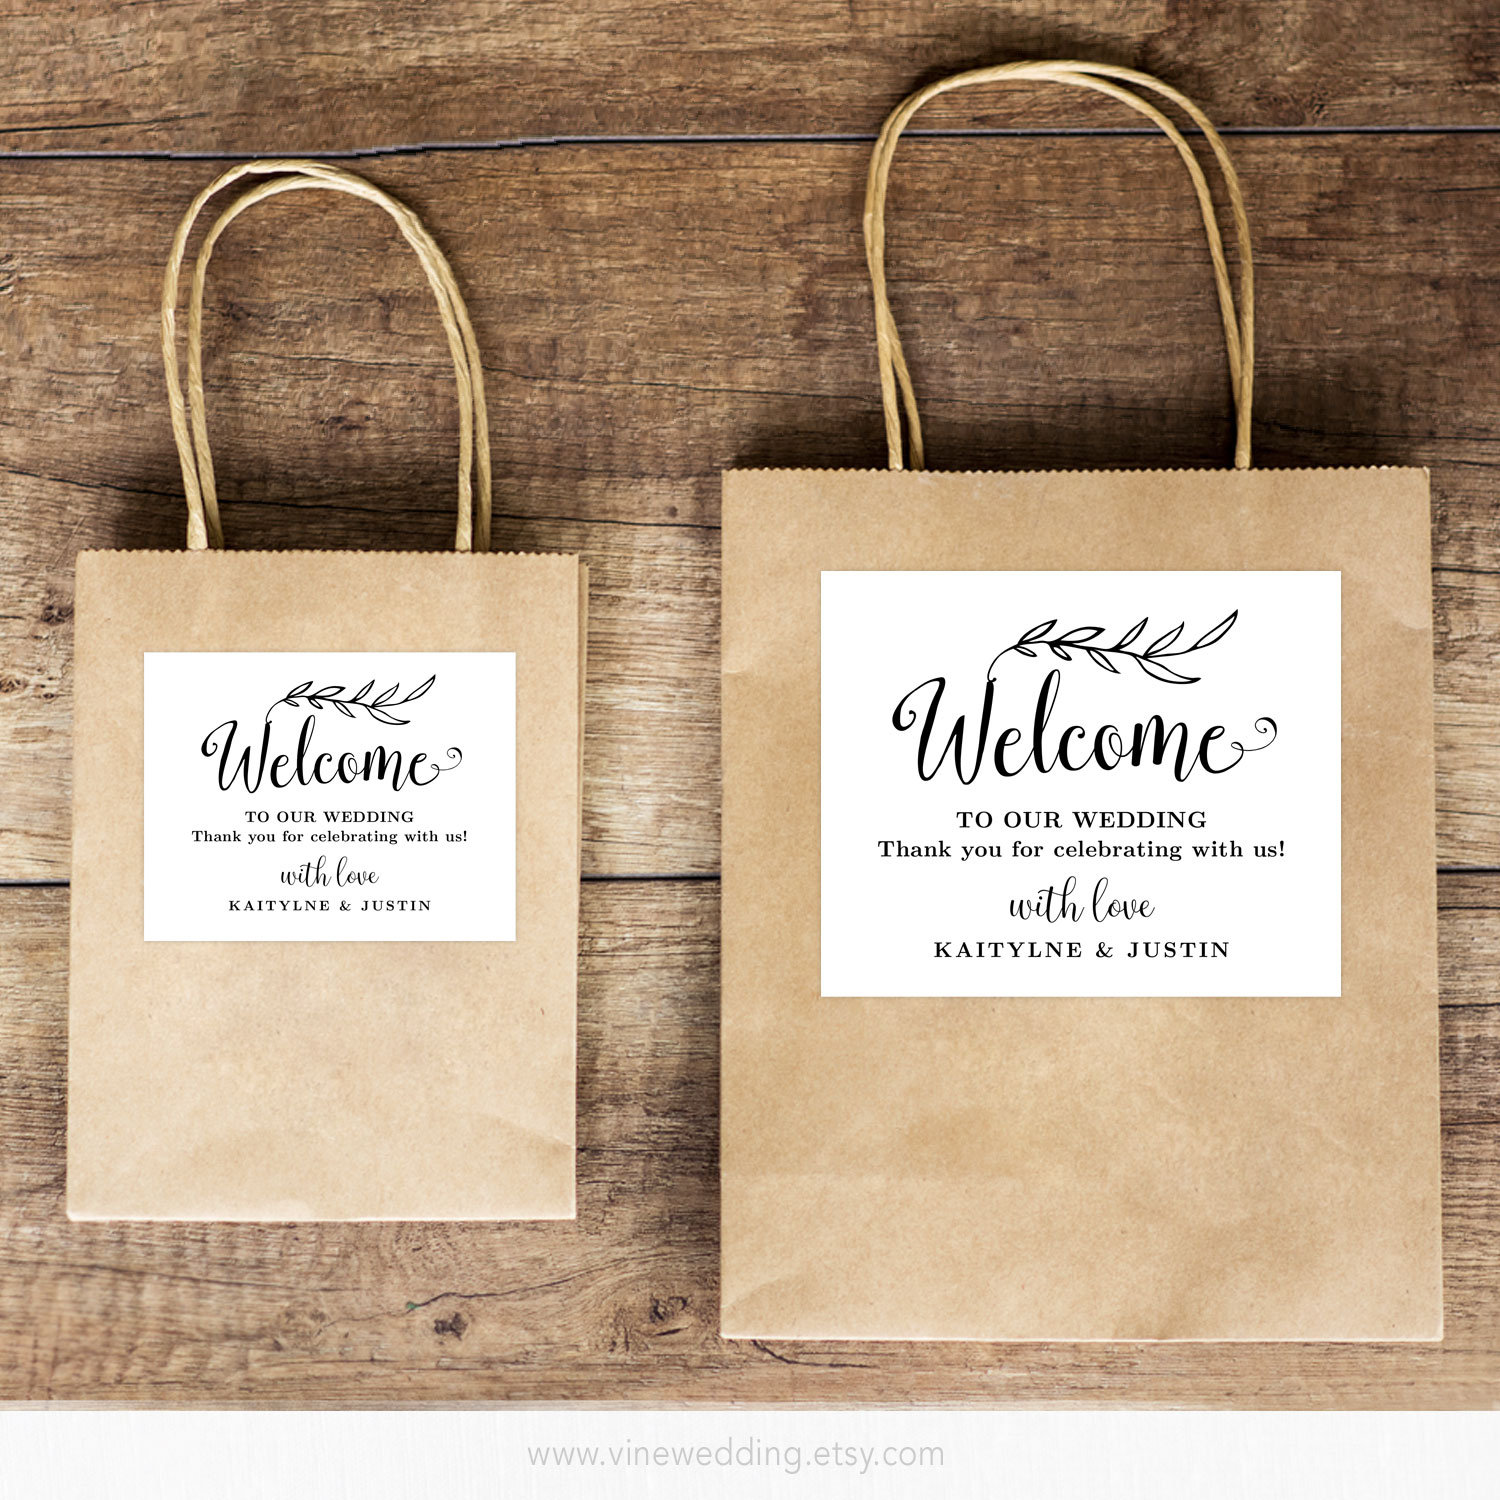 Wedding Welcome Bag Ideas with Free Printable Tags – FAKING IT